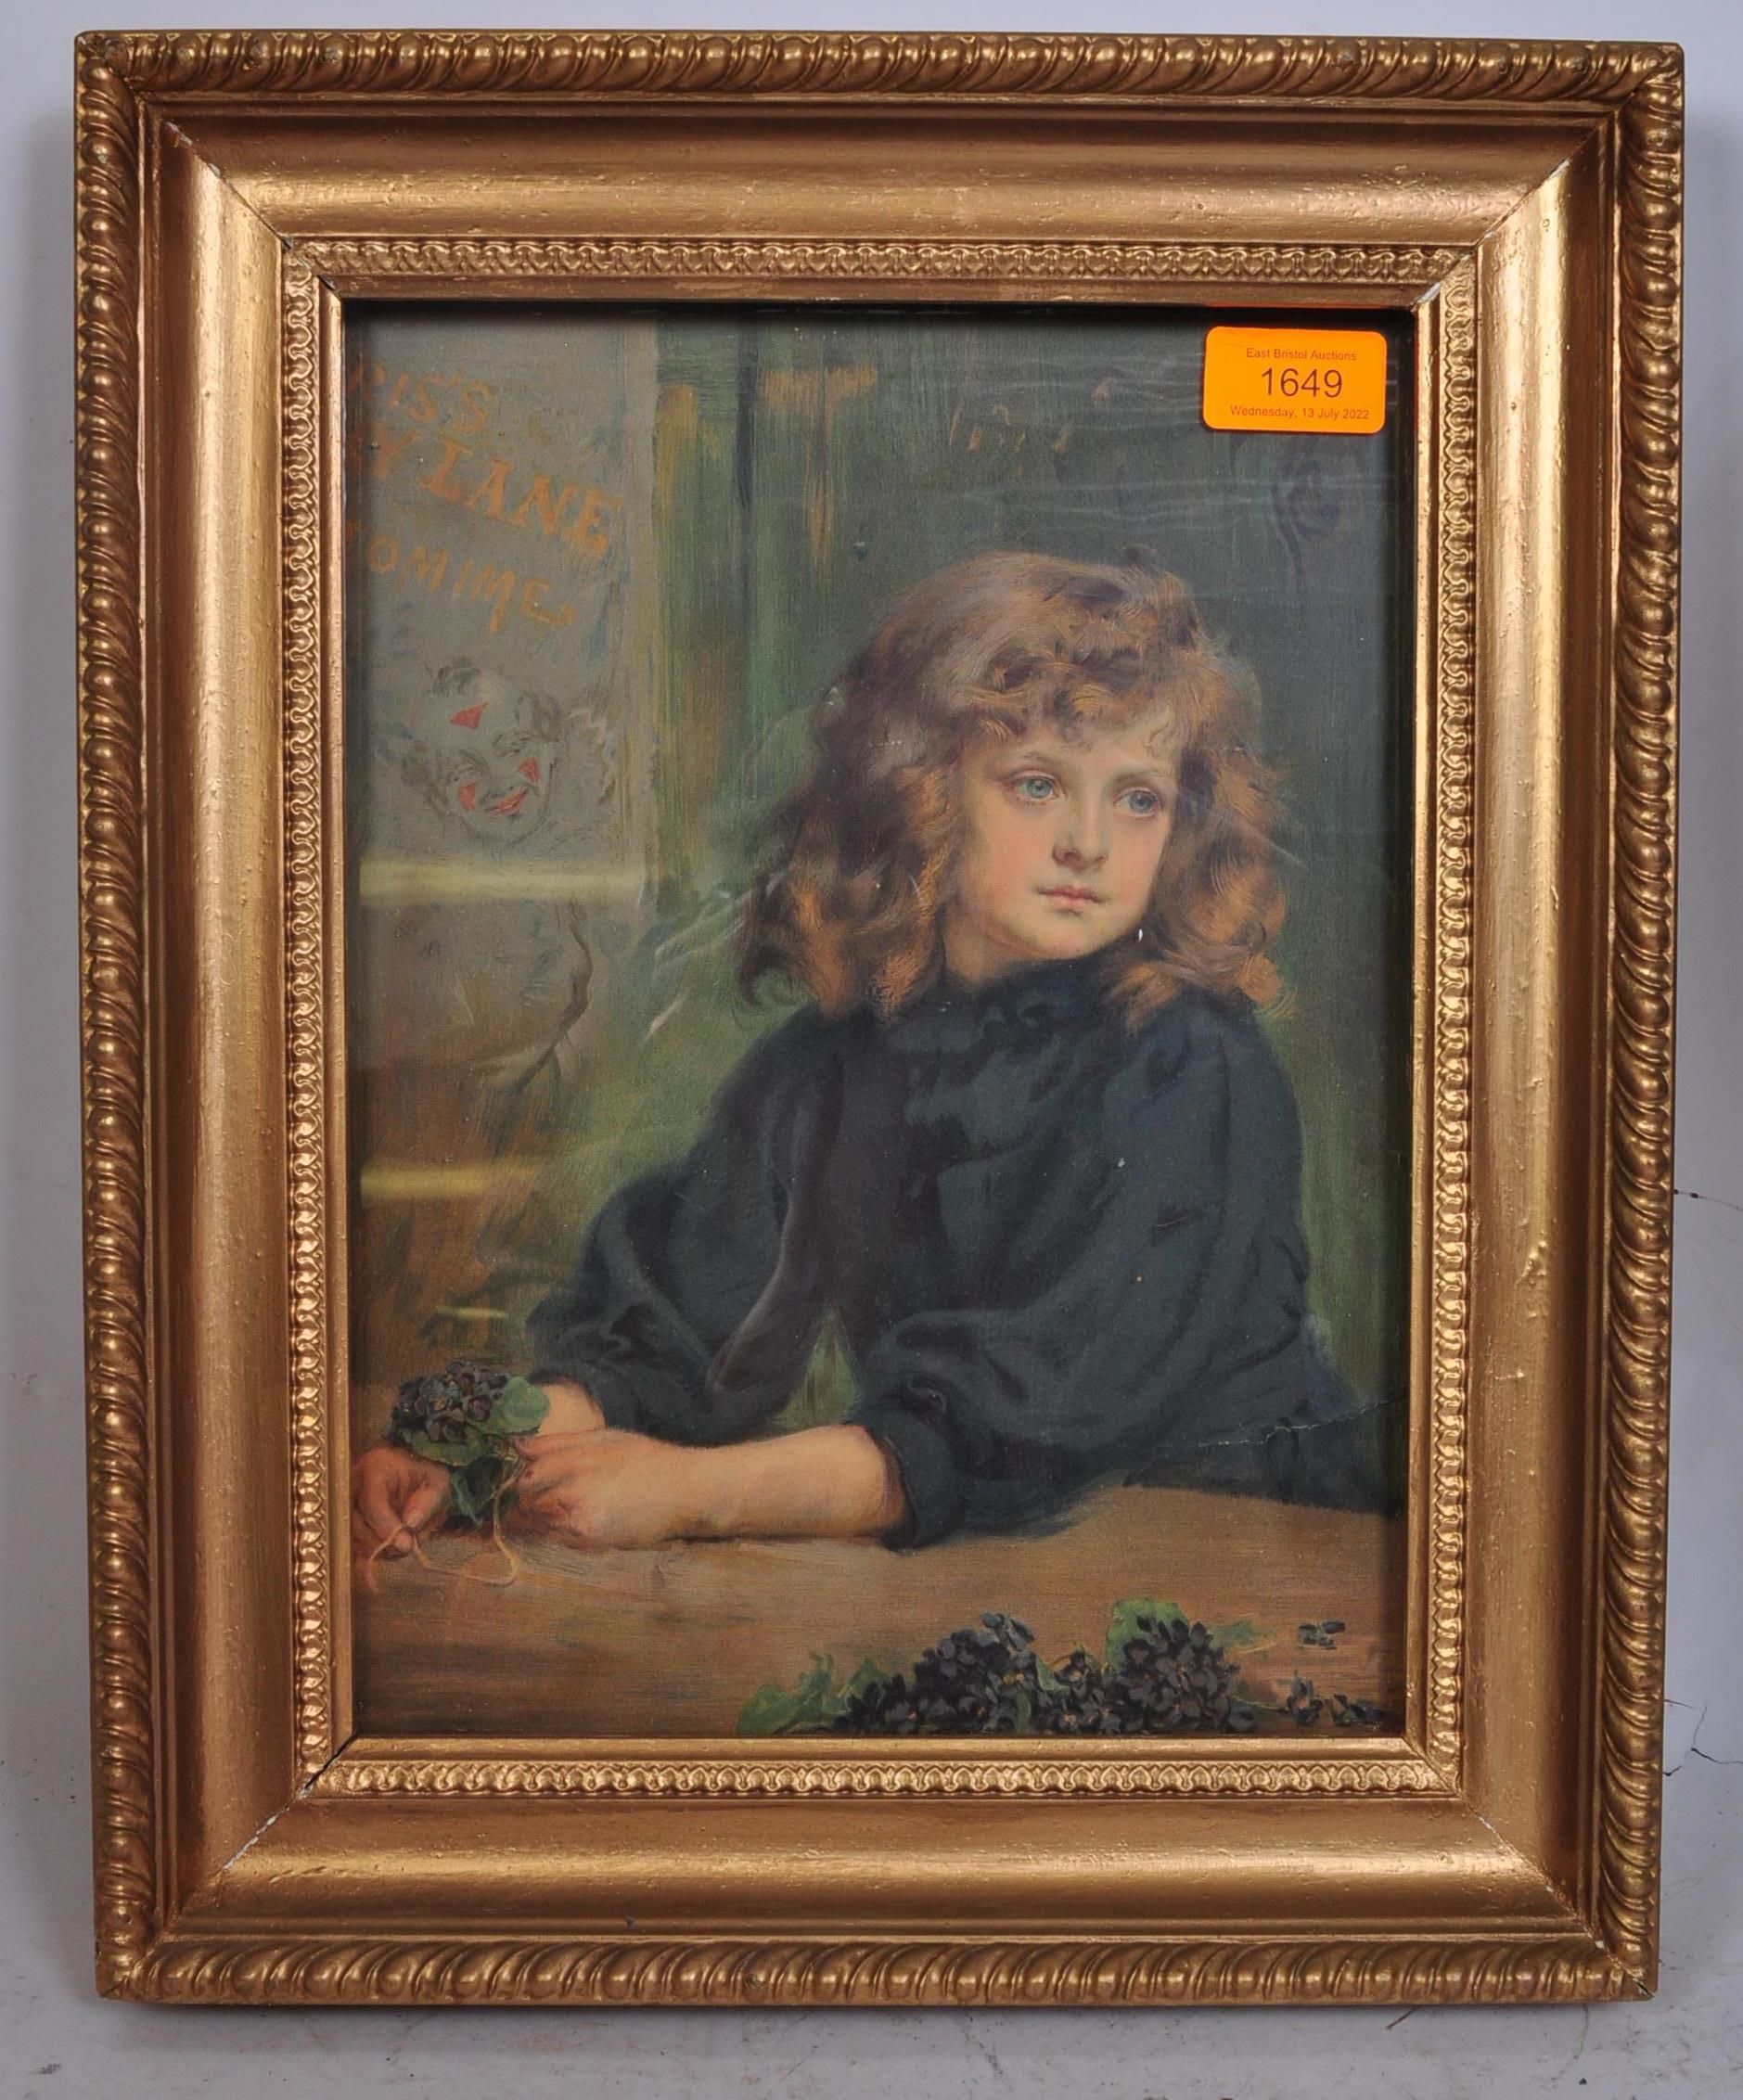 AFTER 19TH CENTURY FRENCH SCHOOL - CHILD IN MOURNING